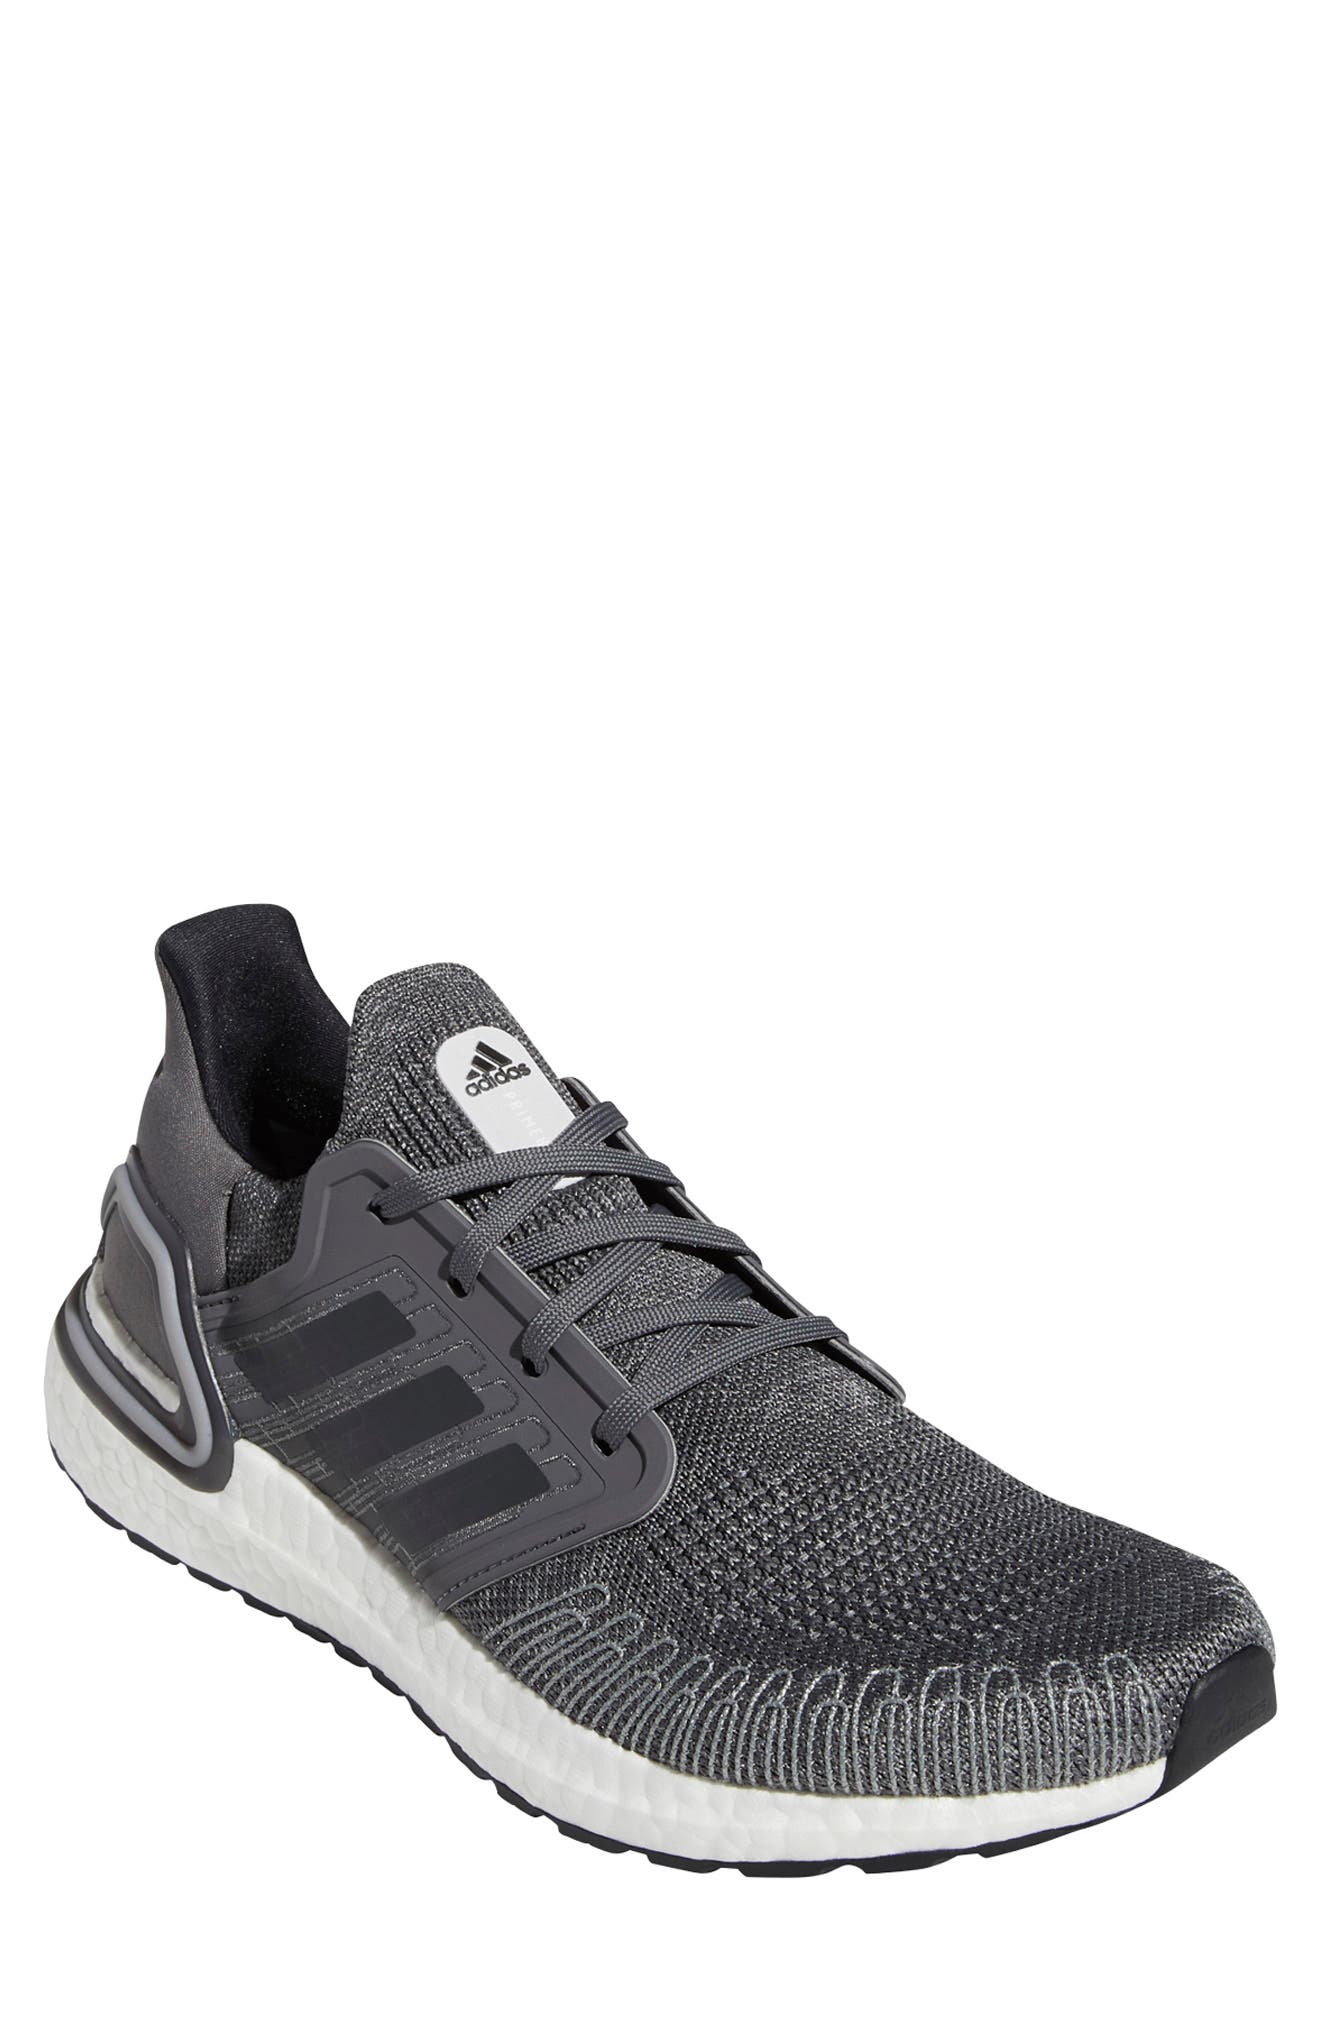 grey adidas shoes for men